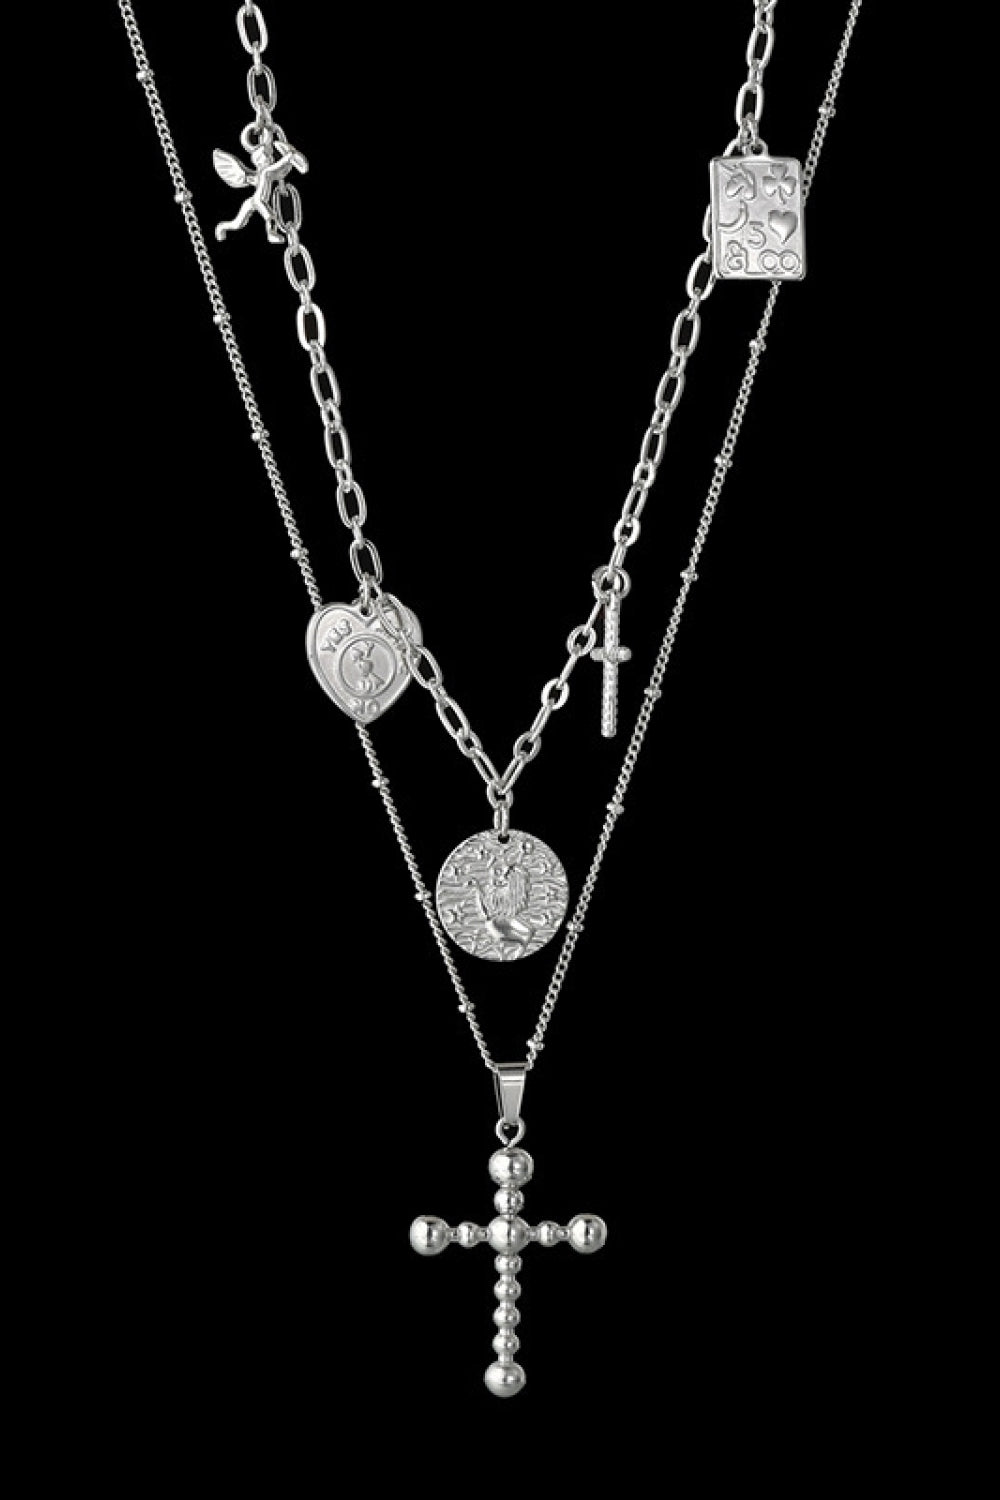 Stainless Steel Antique Coins & Cross Necklace - Guy Christopher 